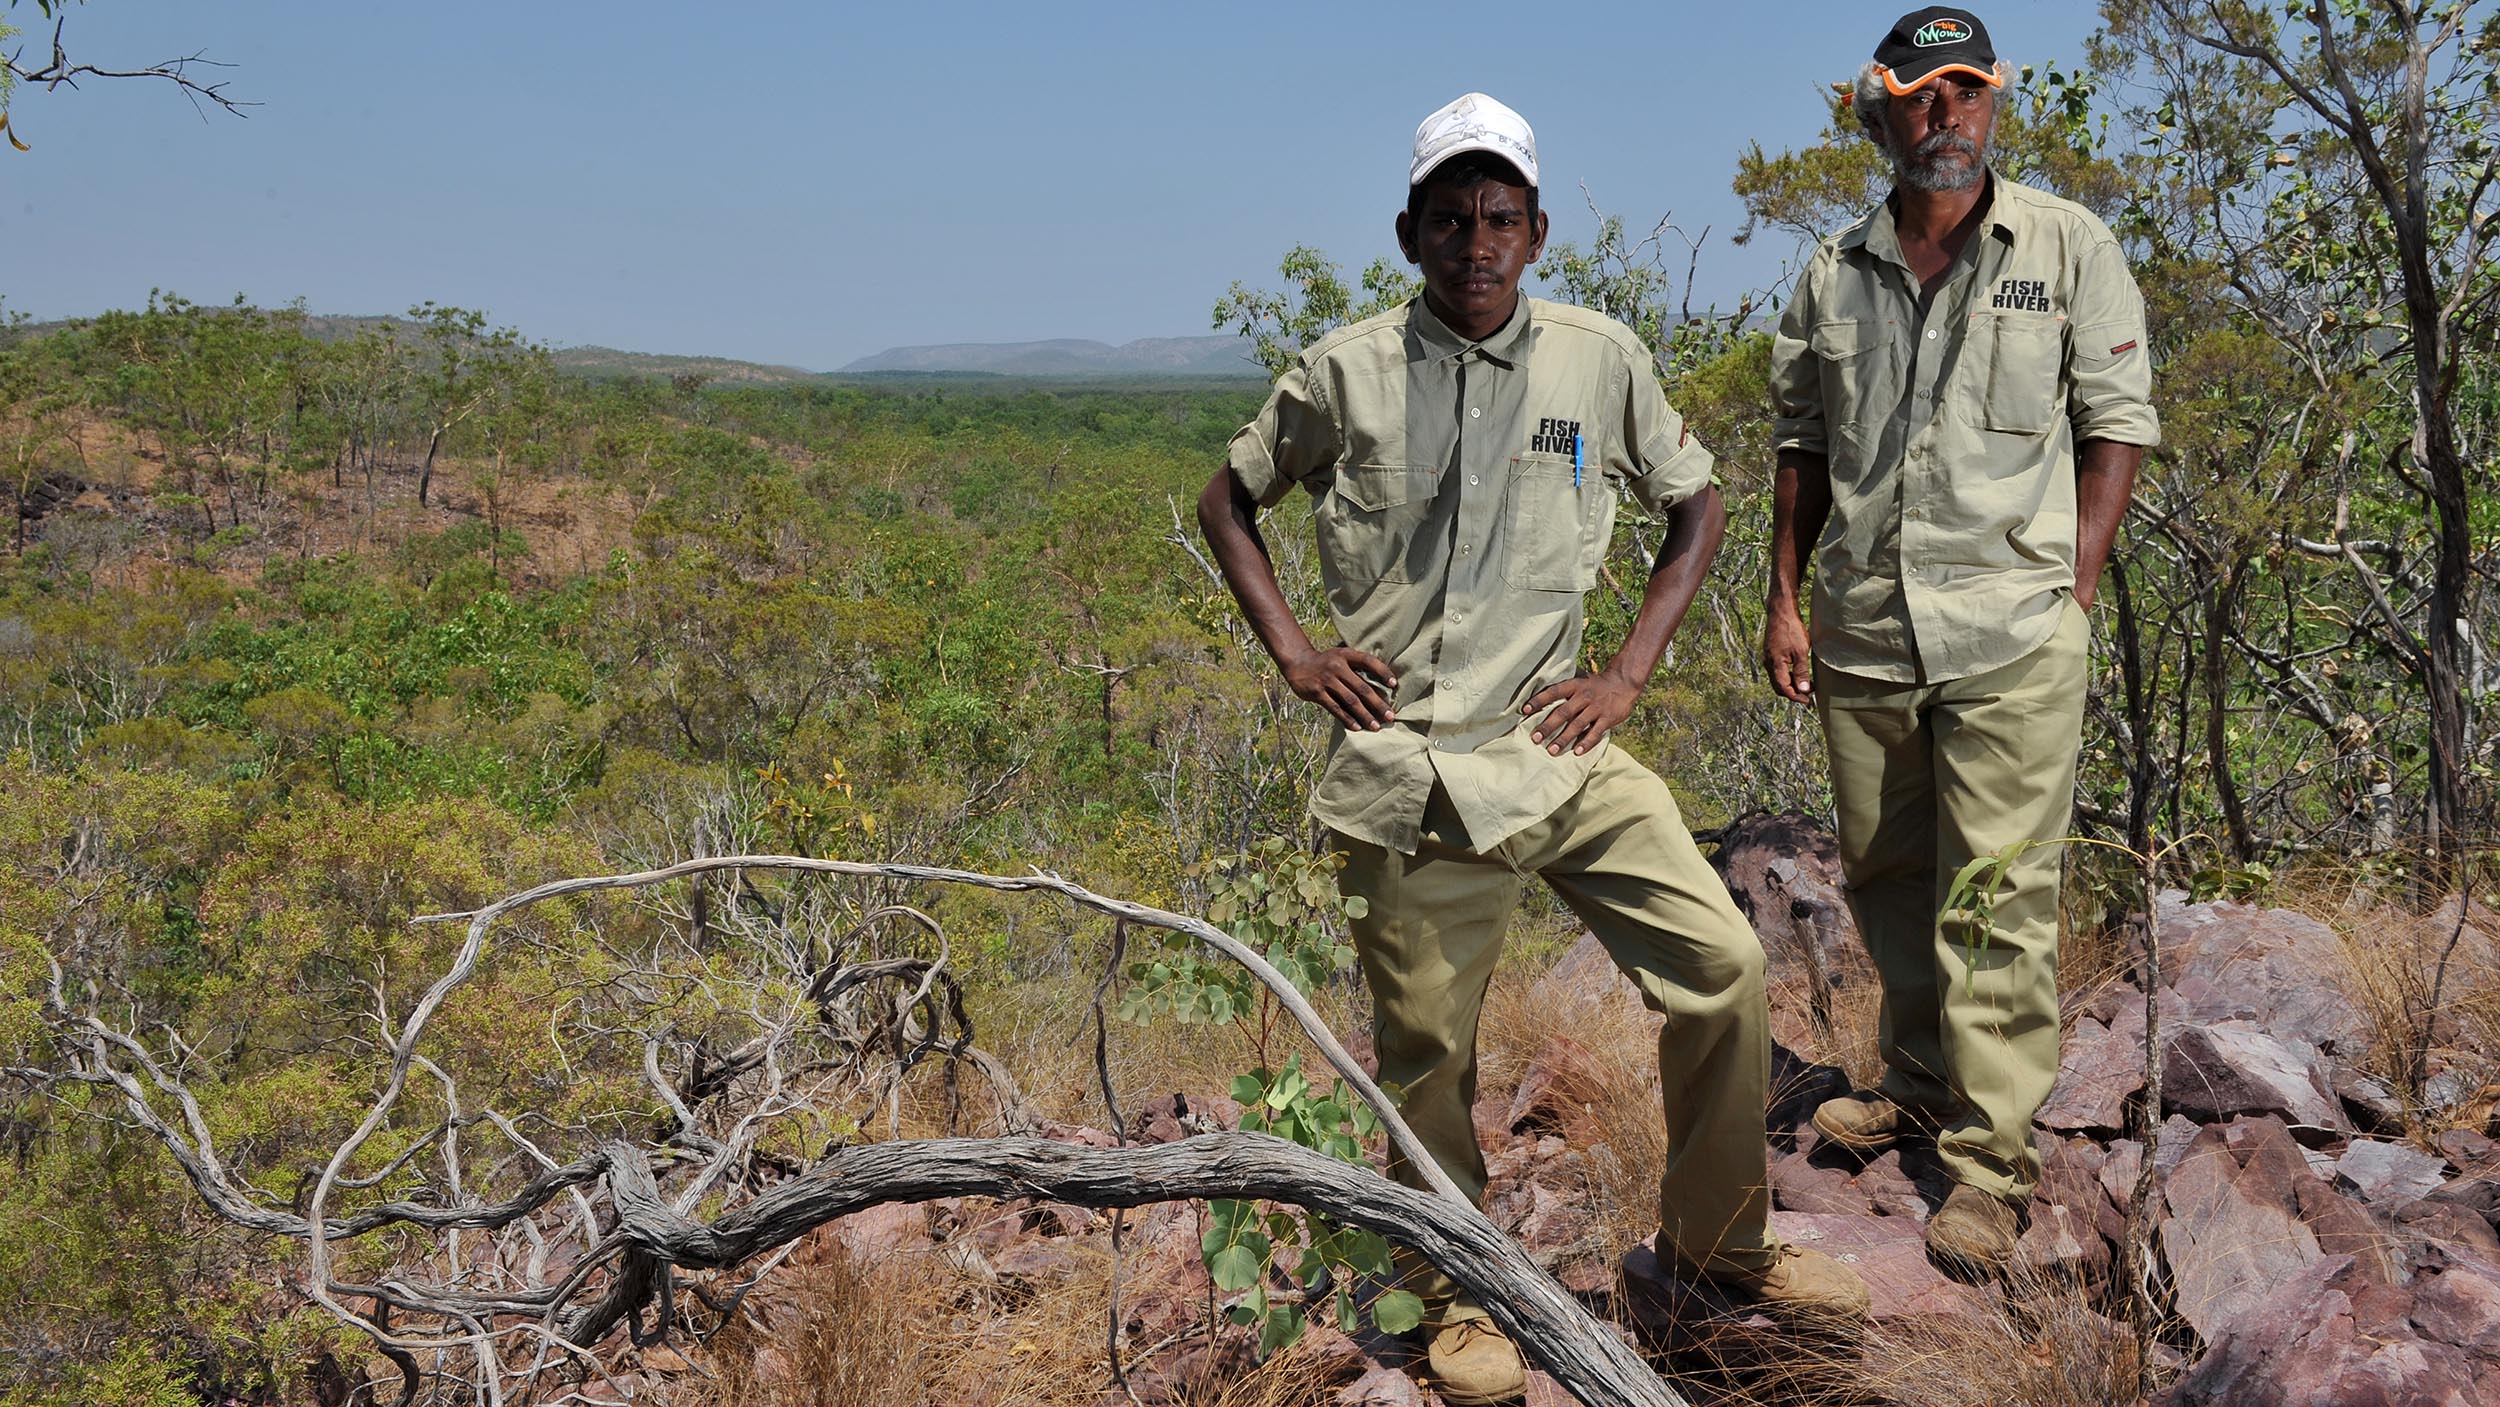 Fish River Rangers Desmond Daly, left, and Jeff Long help manage the 178,000-hectare Fish River Station in the Northern Territory for conservation and cultural heritage. The former cattle property was purchased through a ground-breaking partnership between the Indigenous Land Corporation, The Nature Conservancy, The Pew Charitable Trusts and the Australian Government.